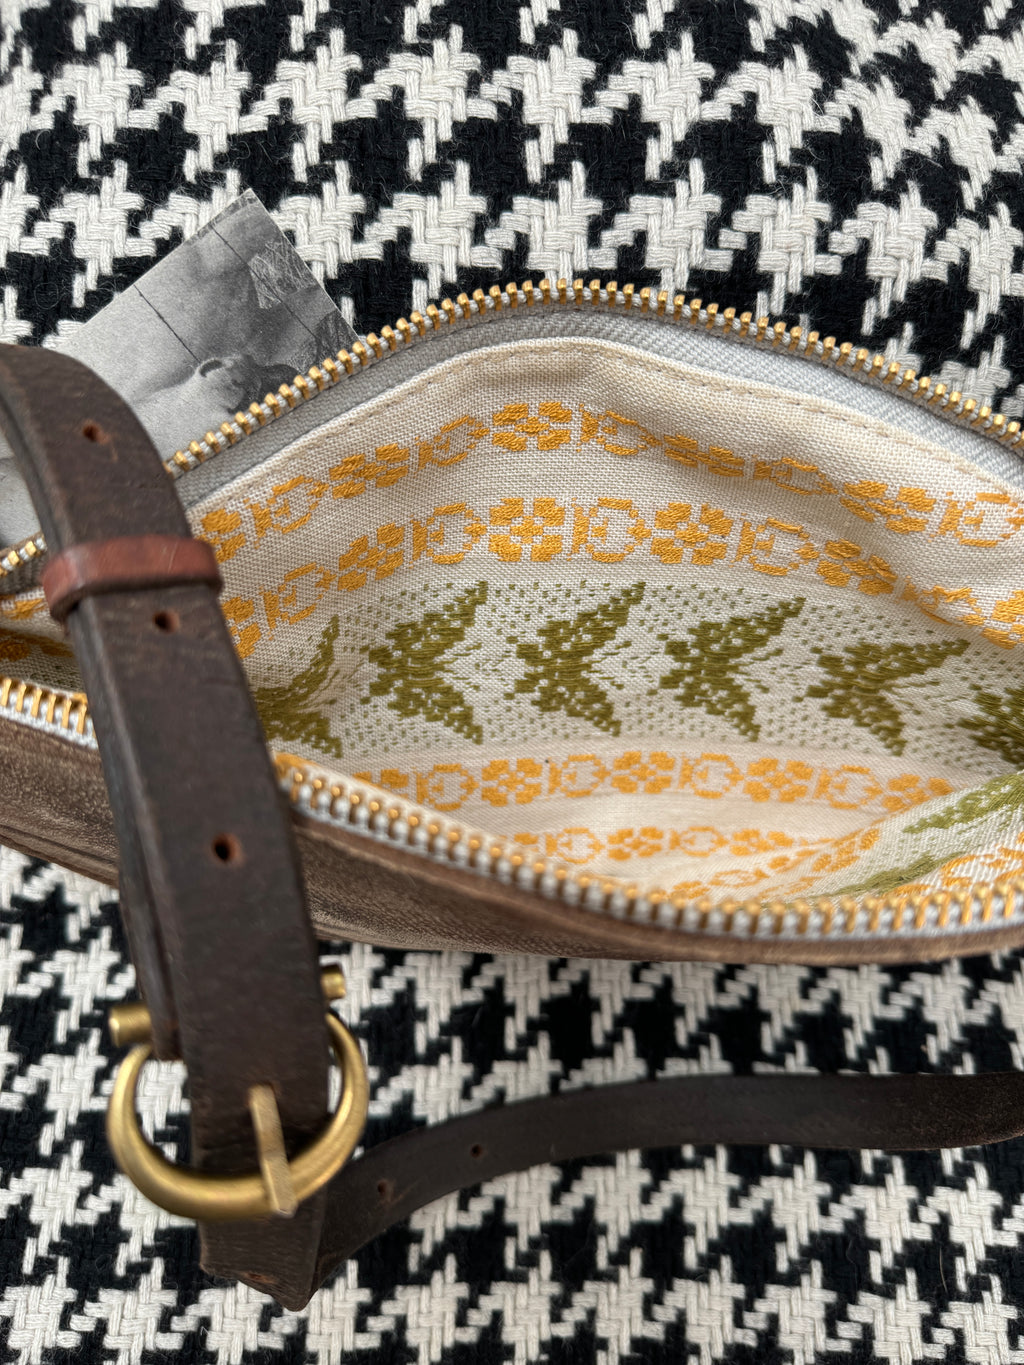 CAMPOS BELT BAG - GREEN & YELLOW VINTAGE FABRIC WITH EMBROIDERED BUTTERFLIES